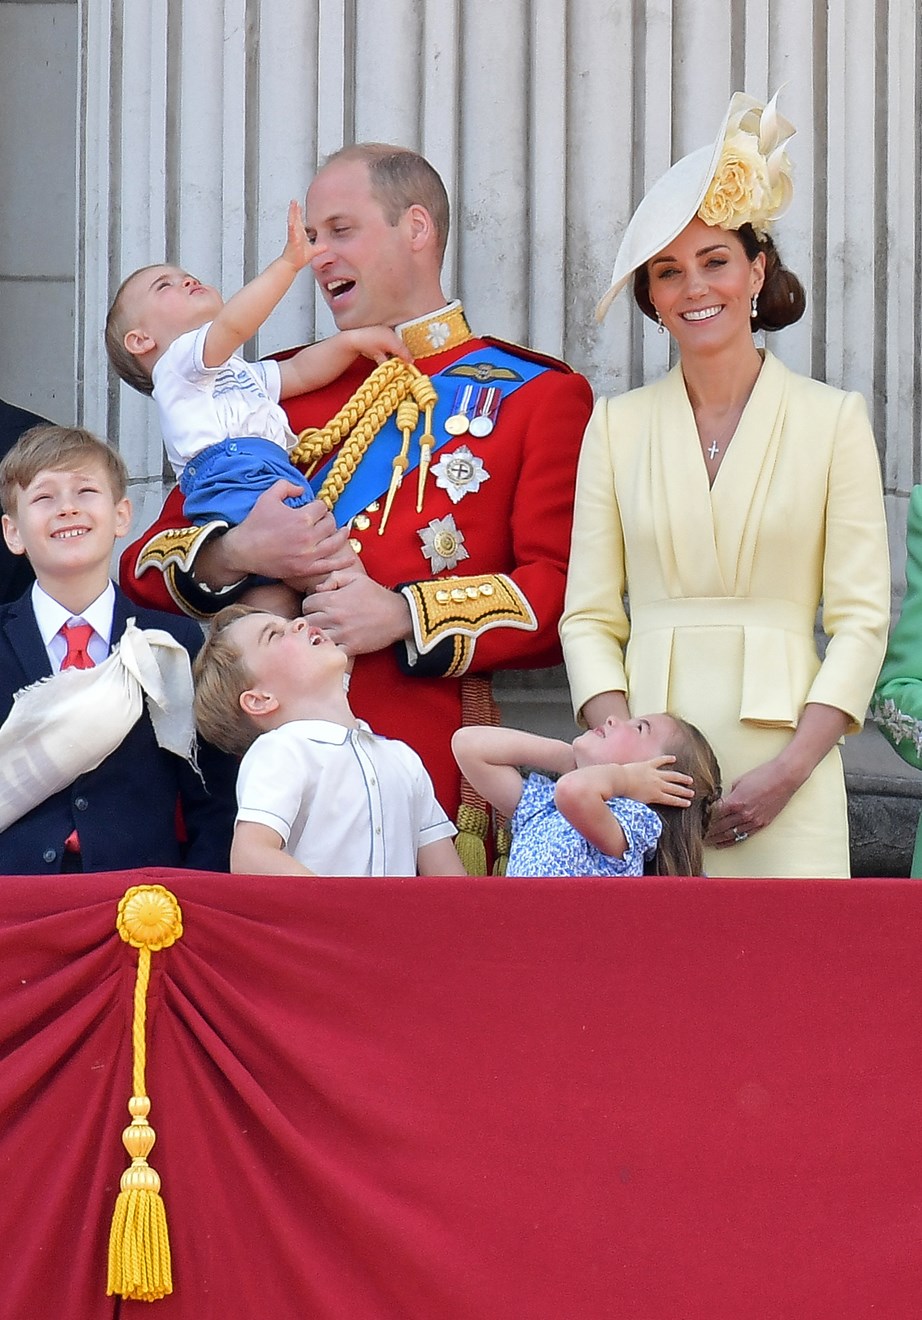 Princess Charlotte had the right idea, protecting her royal ears from the loud jet planes. *(Image: Getty)*